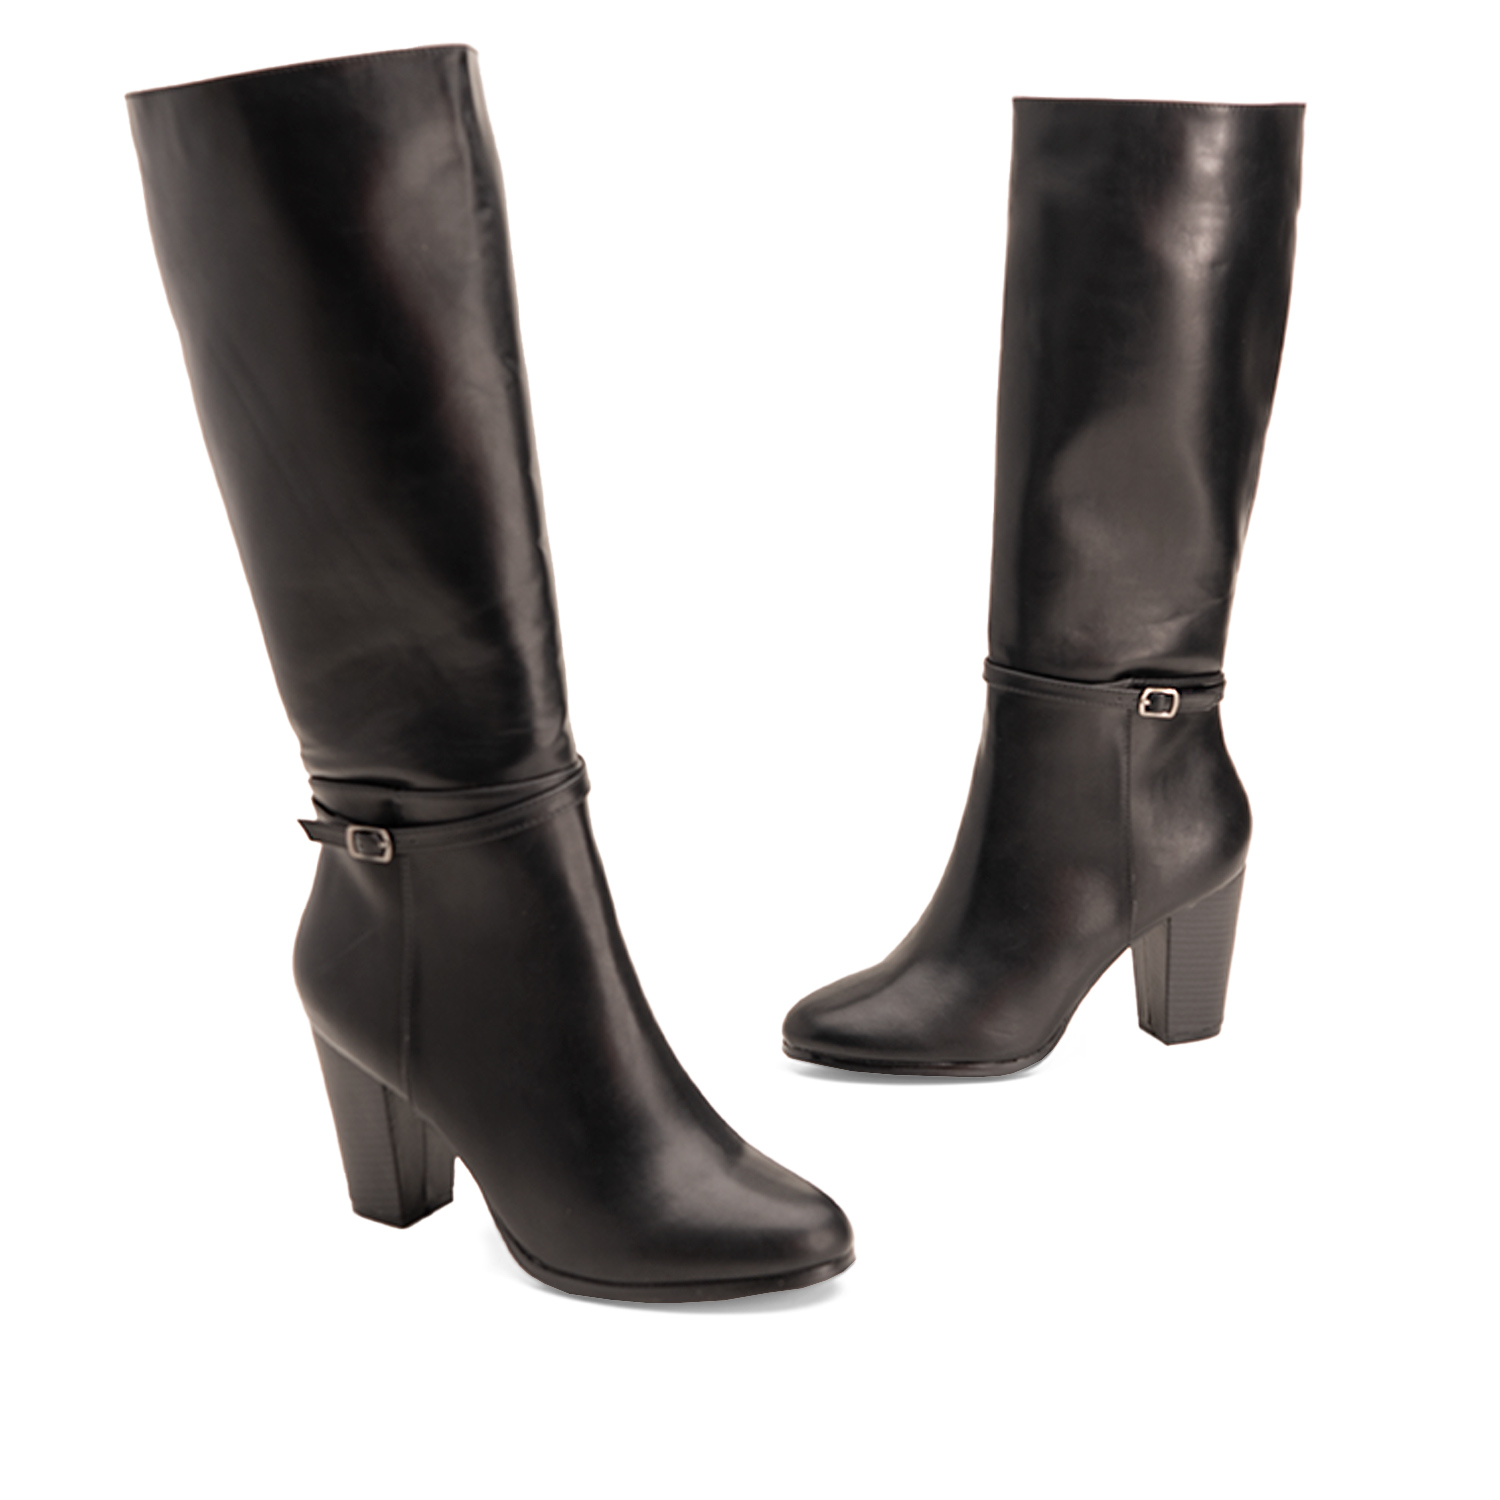 Heeled boots in black faux leather with buckled strap detail 